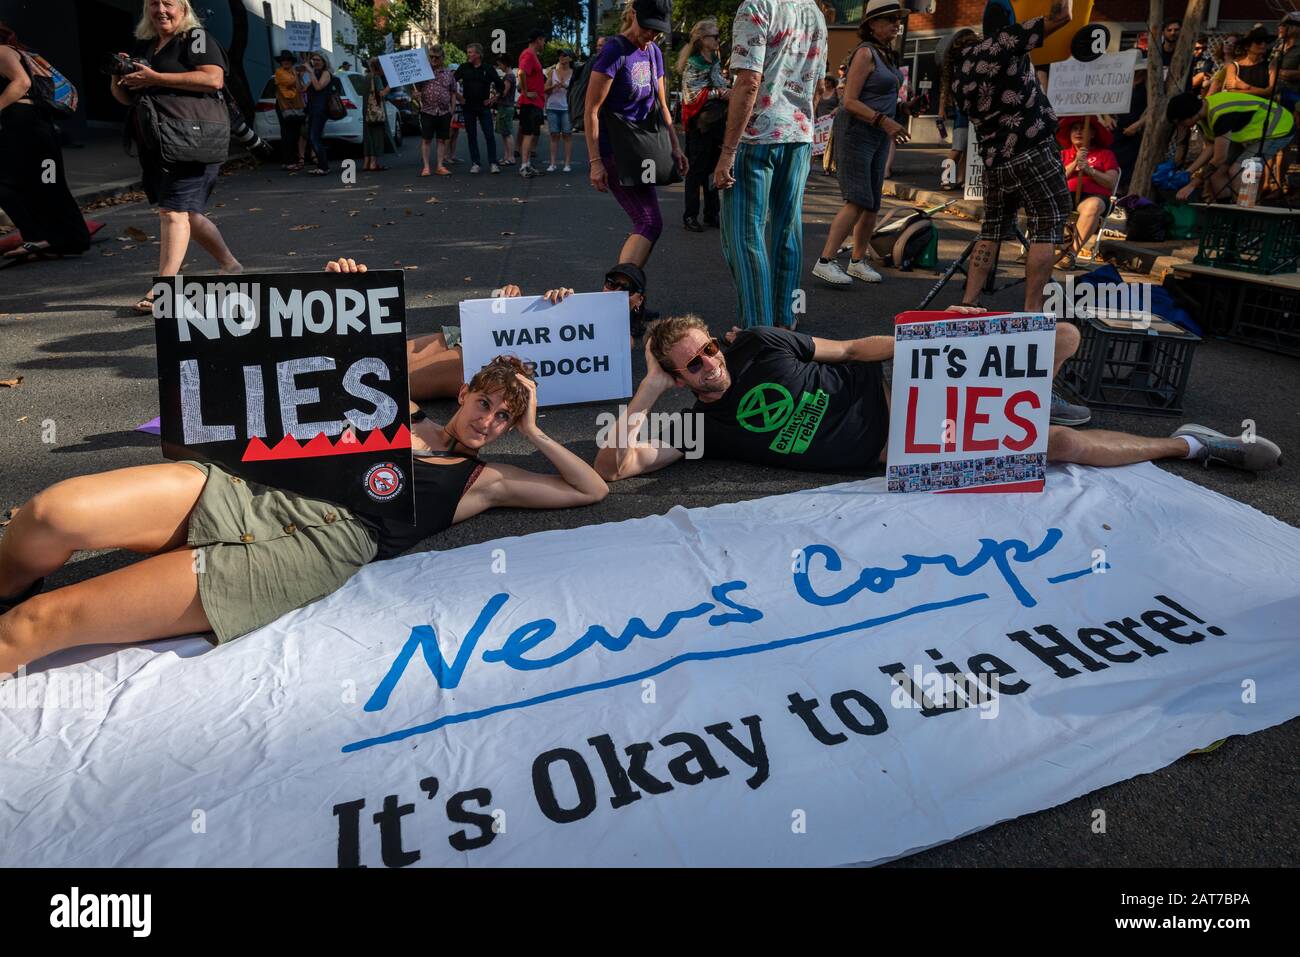 Sydney, NSW, Australia January 31, 2020: Hundreds of  climate activists lie down in front of News Corp Australia calling the Murdoch press liers. Stock Photo